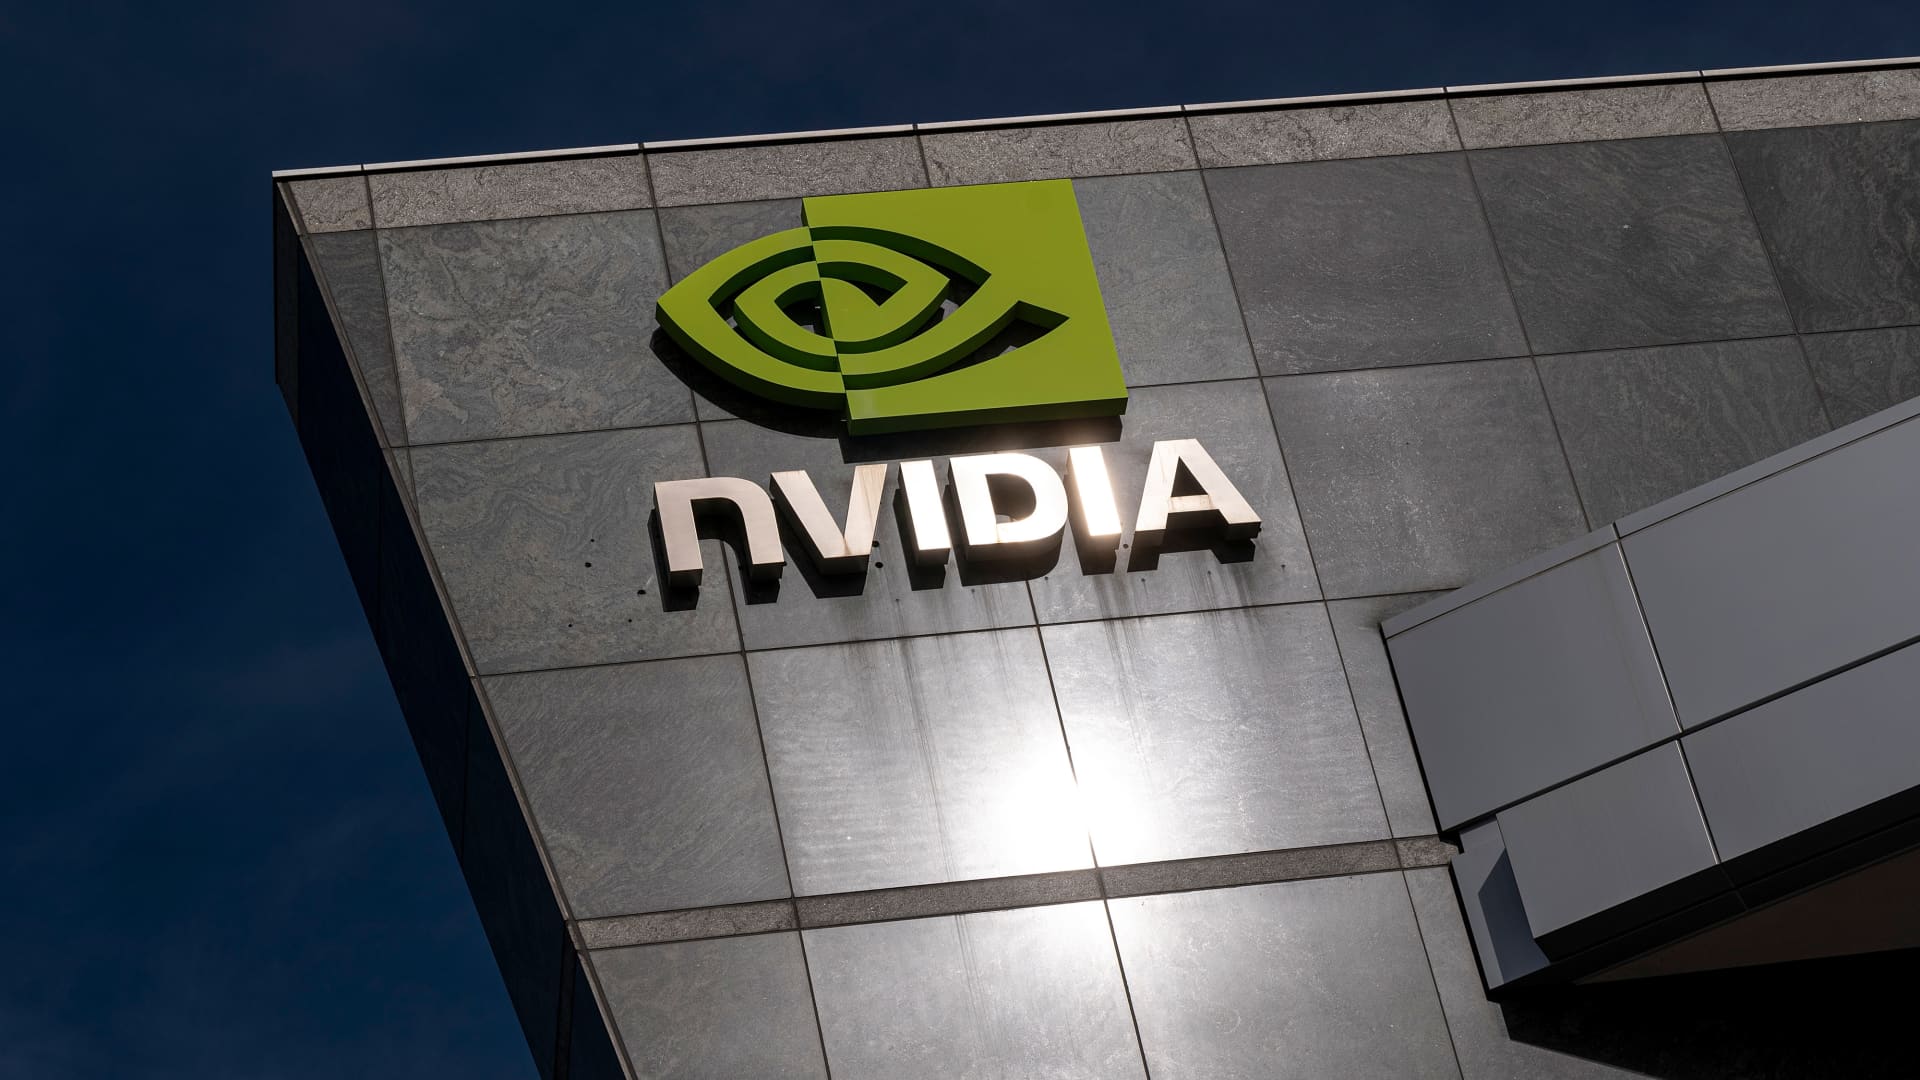 Stocks making the biggest moves midday: Nvidia, Peloton, Foot Locker, Dick's Sporting Goods and more